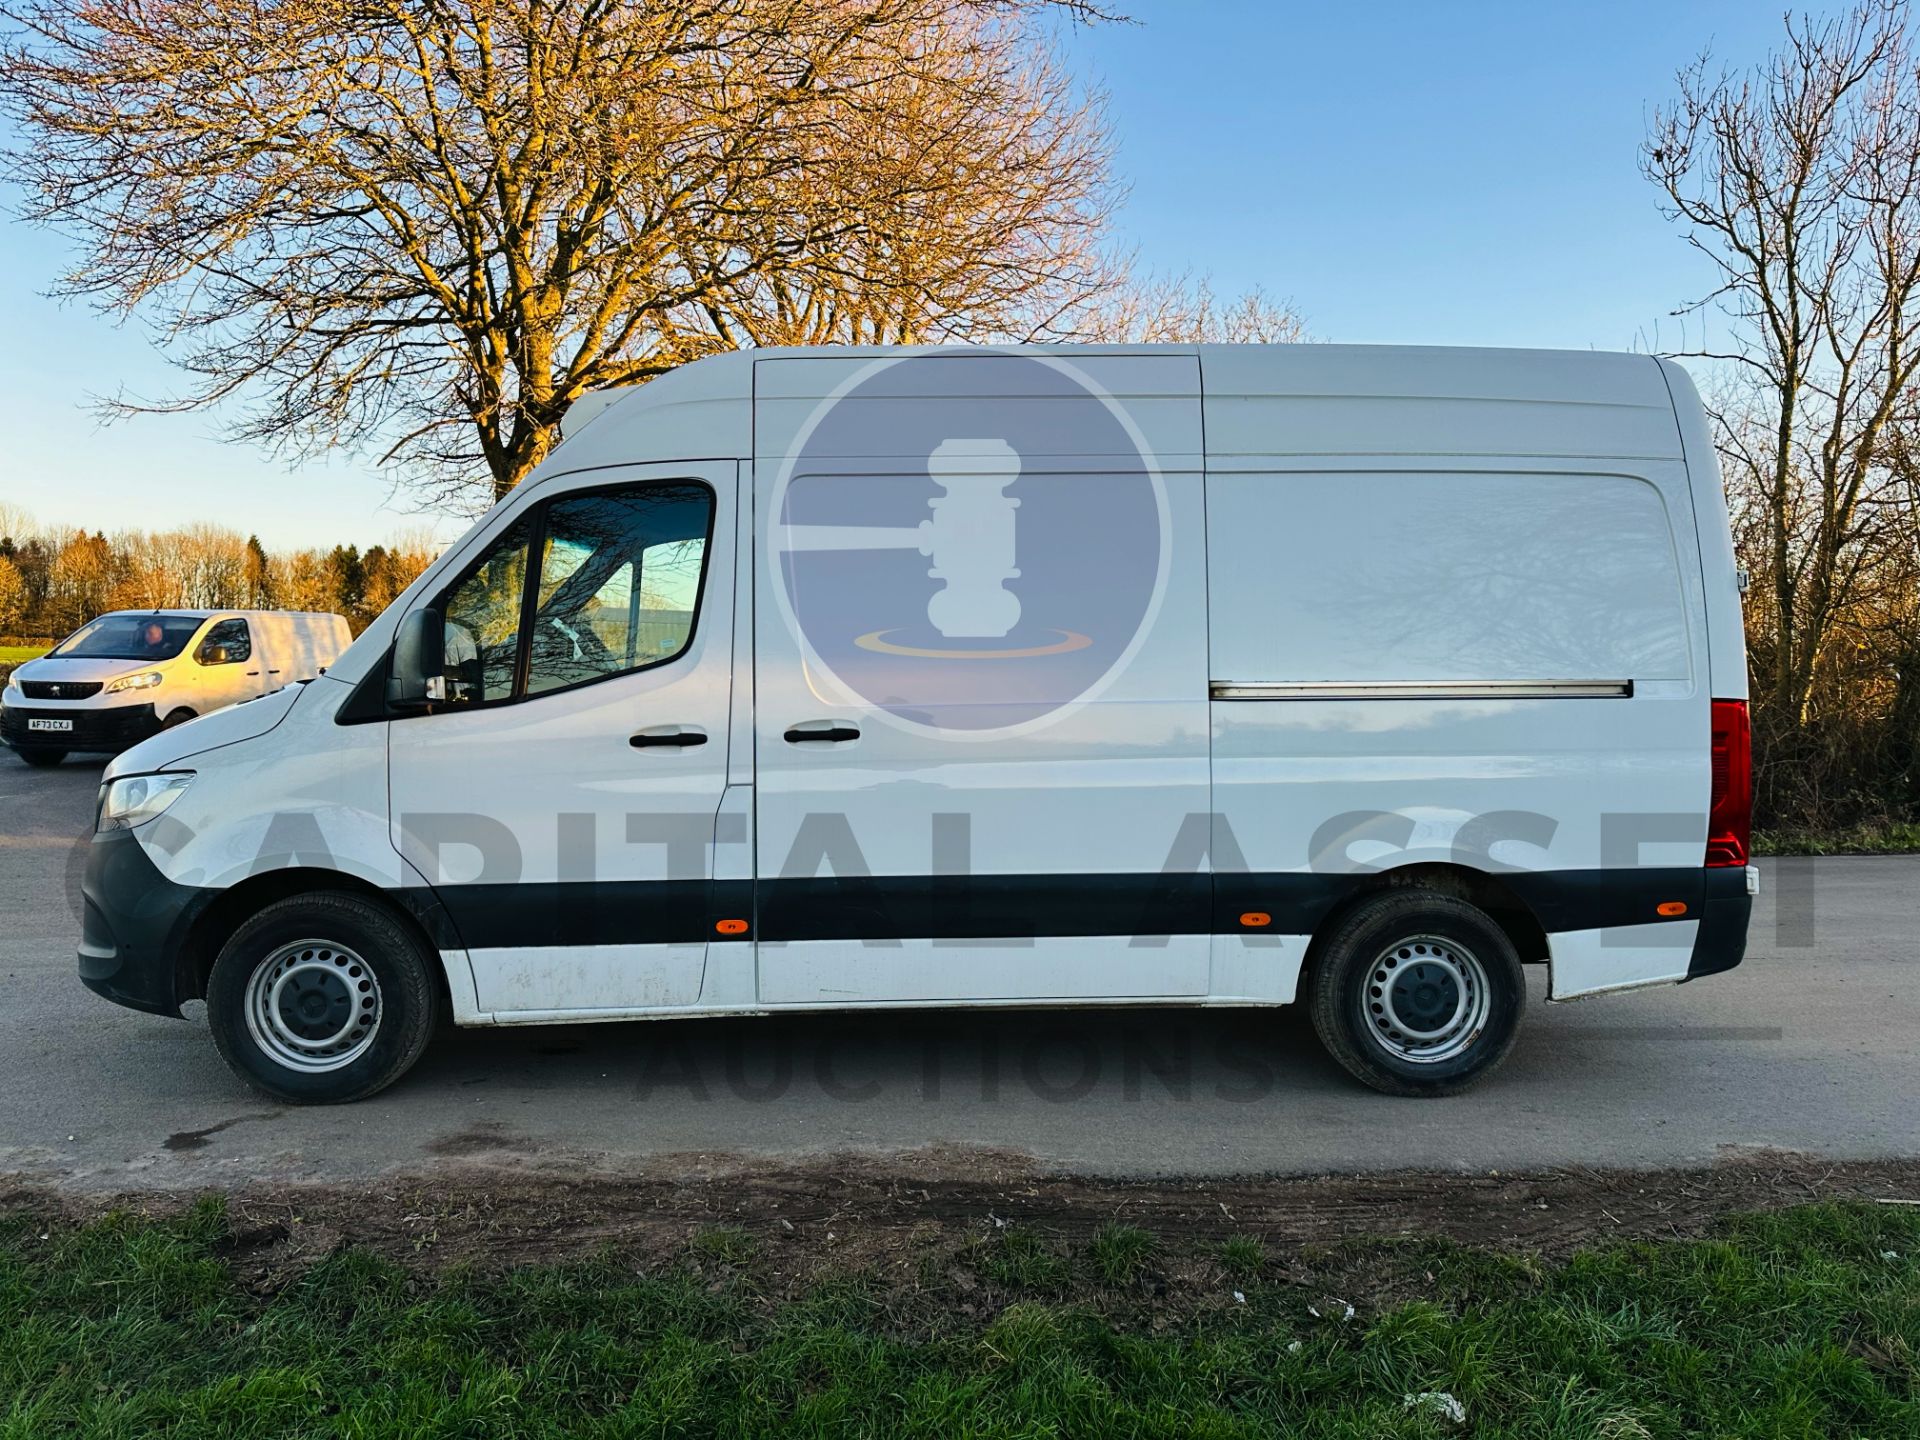 MERCEDES-BENZ SPRINTER 314 CDI *MWB - REFRIGERATED VAN* (2019 - FACELIFT MODEL) *OVERNIGHT STANDBY* - Image 6 of 32